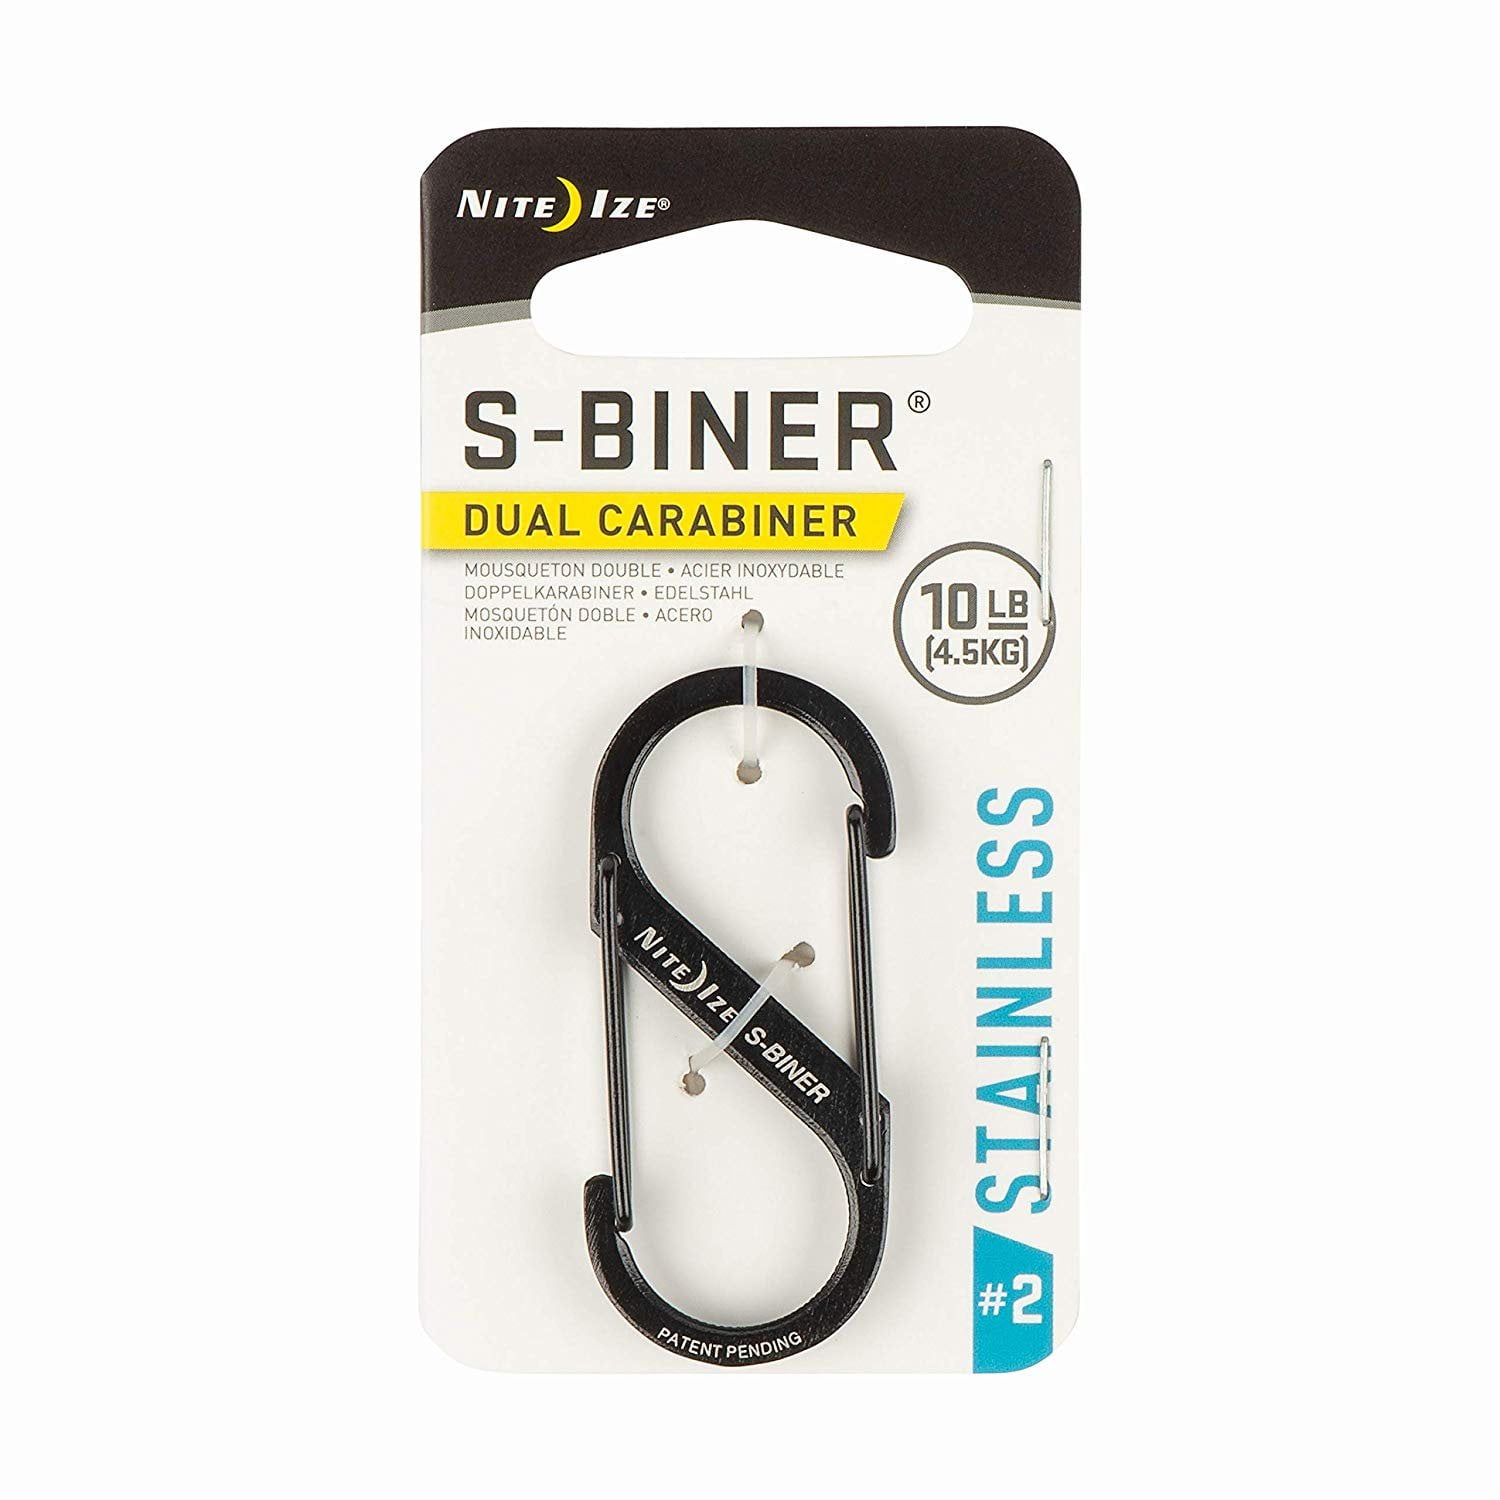 Carabiner Nite Ize S-Biner 3 Pack Black Stainless Steel Sizes #2,#3 and #4 